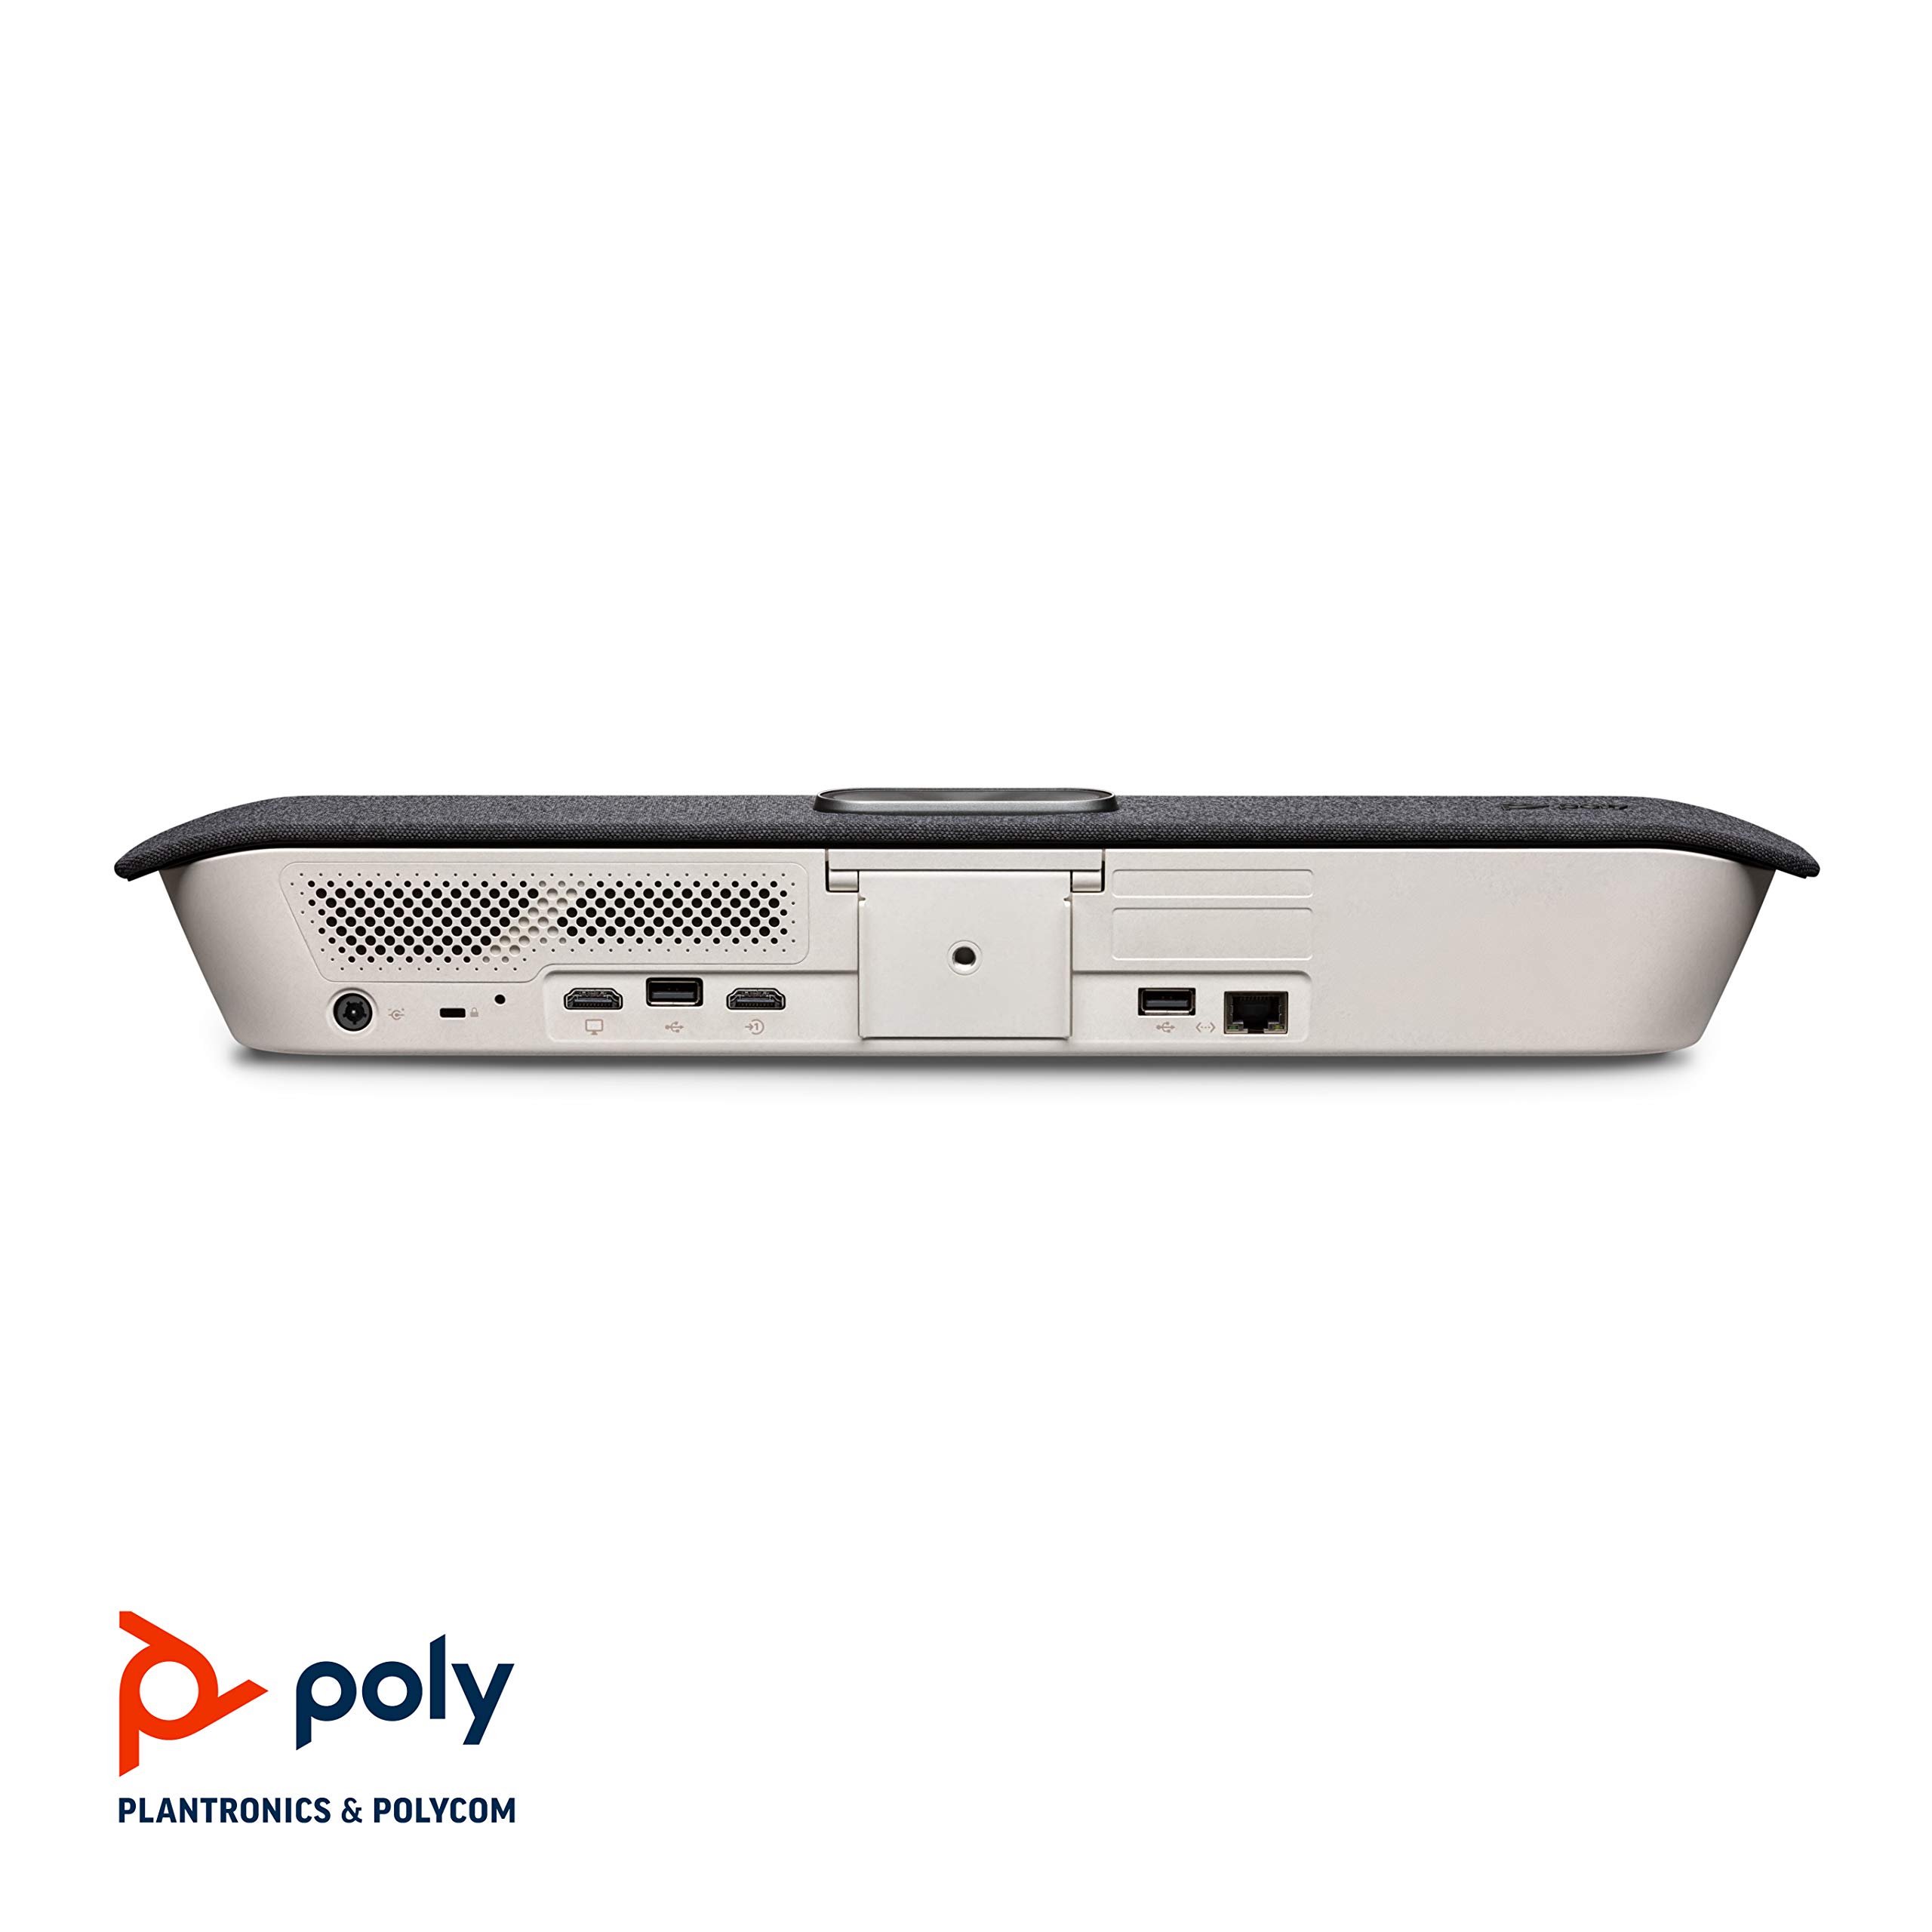 Poly - Studio X30 (Polycom) with TC8 Touch Controller - 4K Video & Audio Bar - Conferencing System for Small Meeting Rooms - Works with Teams, Zoom & More